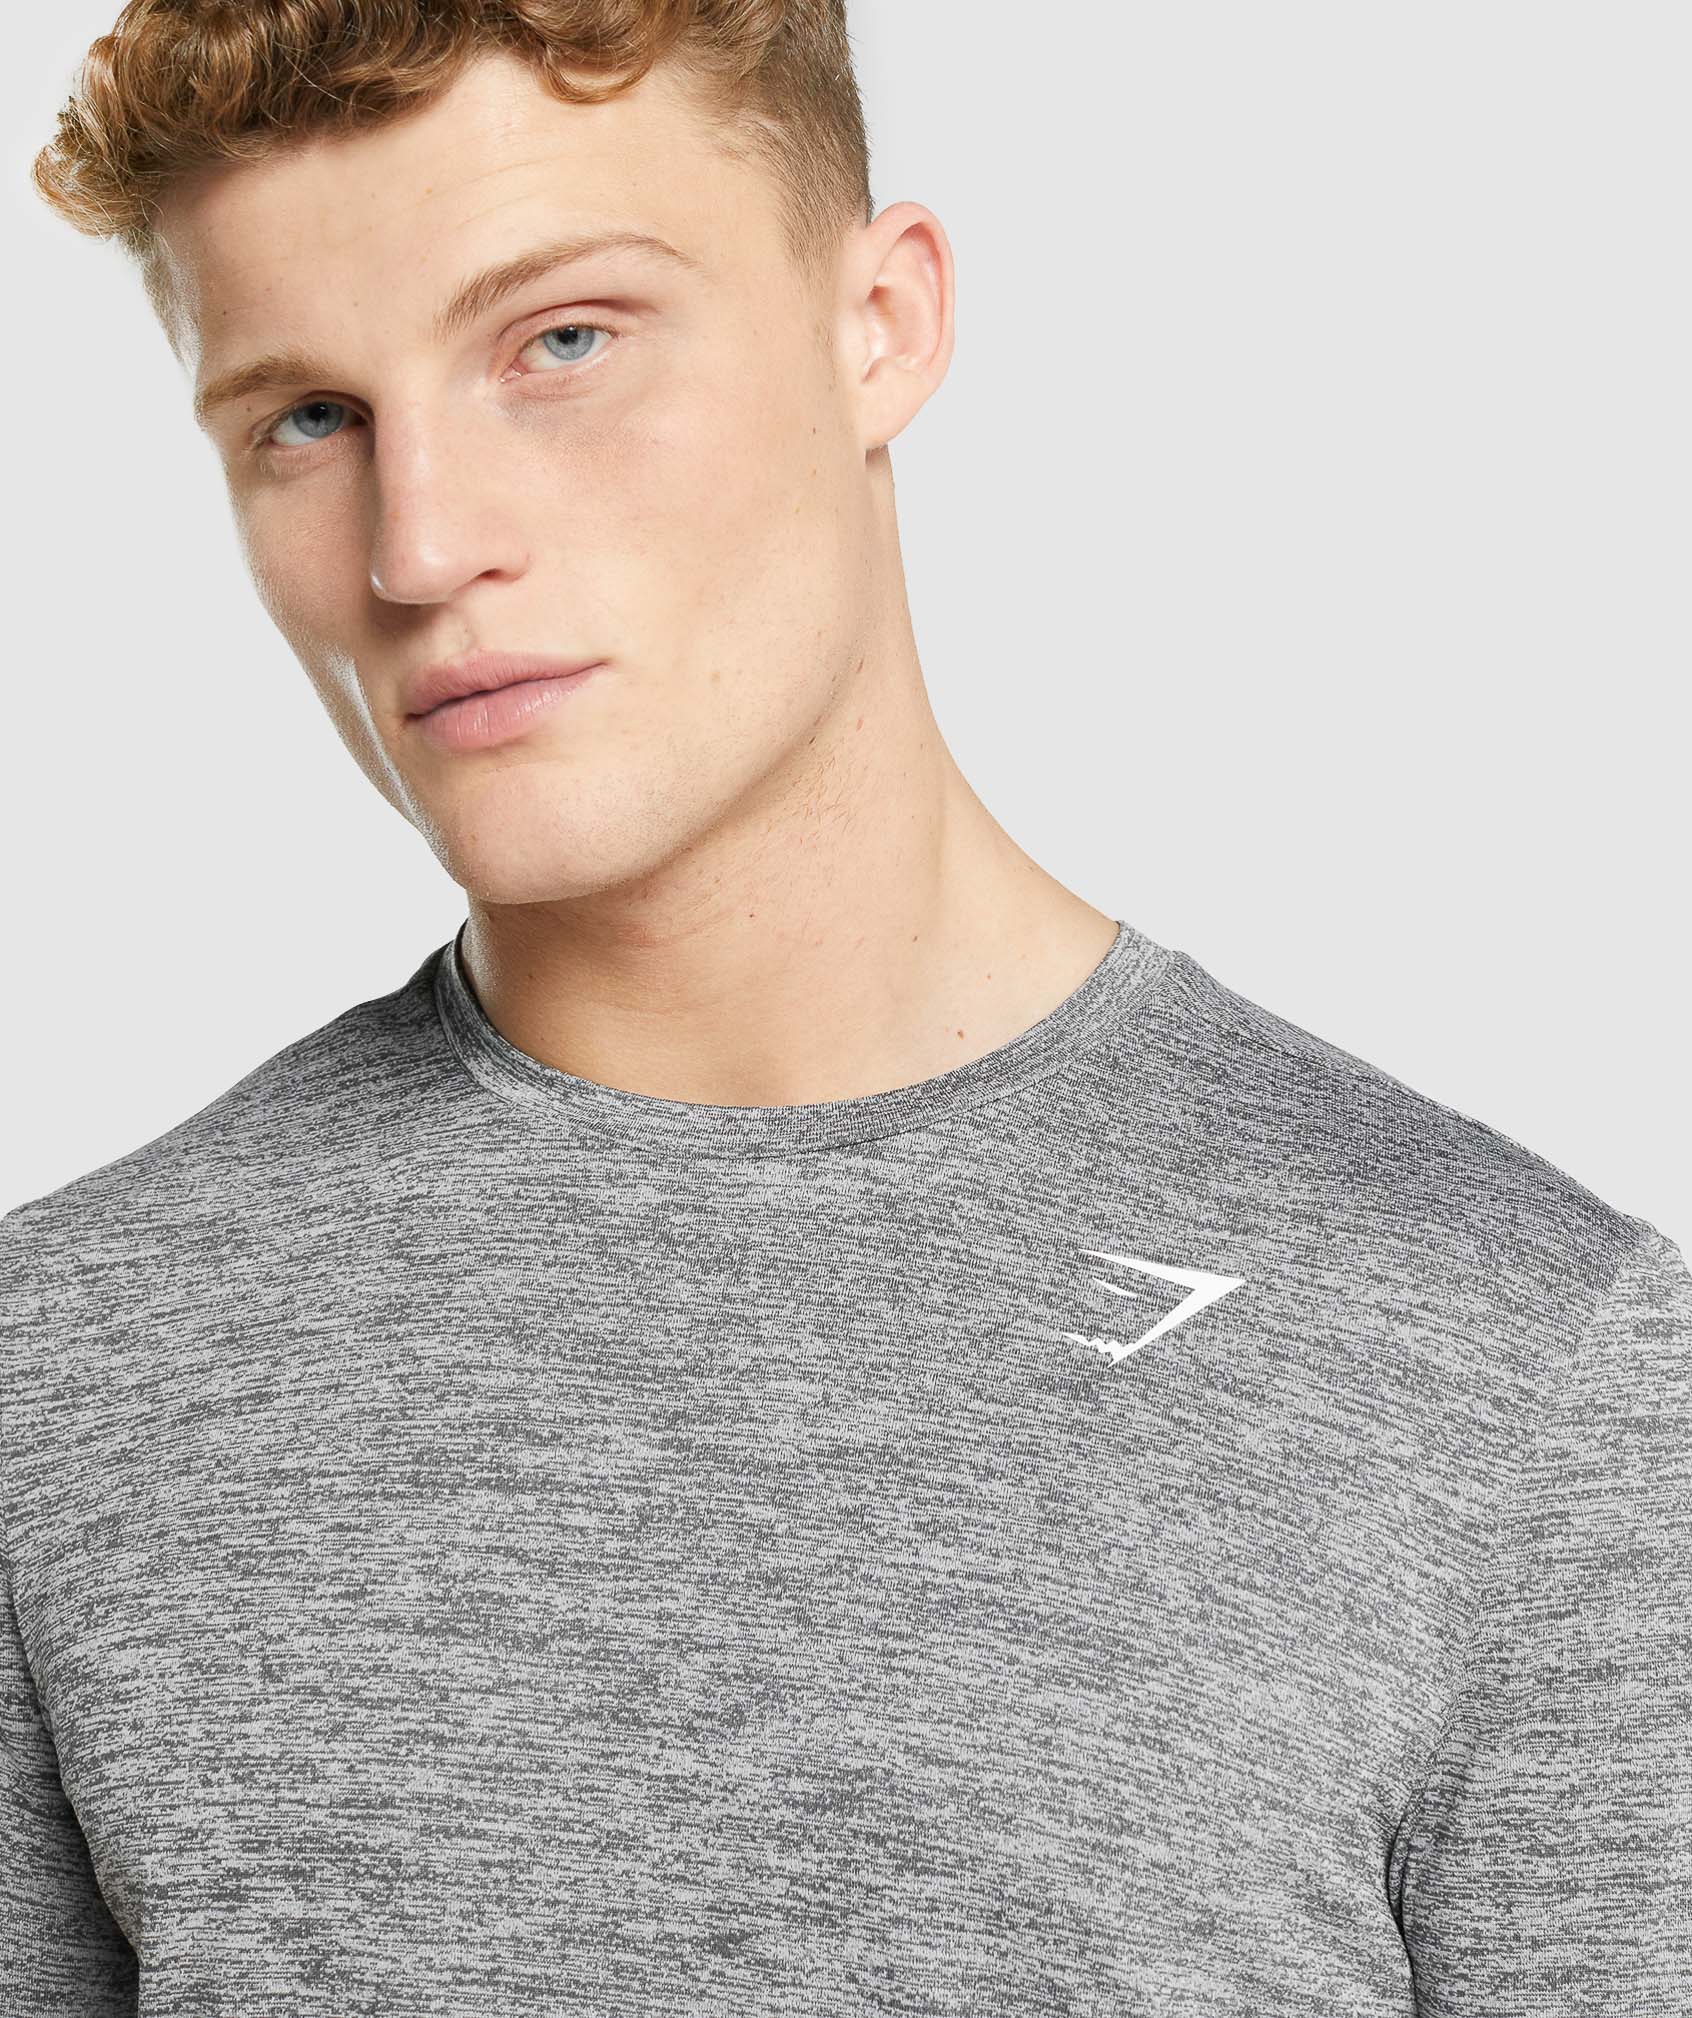 Arrival Marl T-Shirt in Charcoal Marl